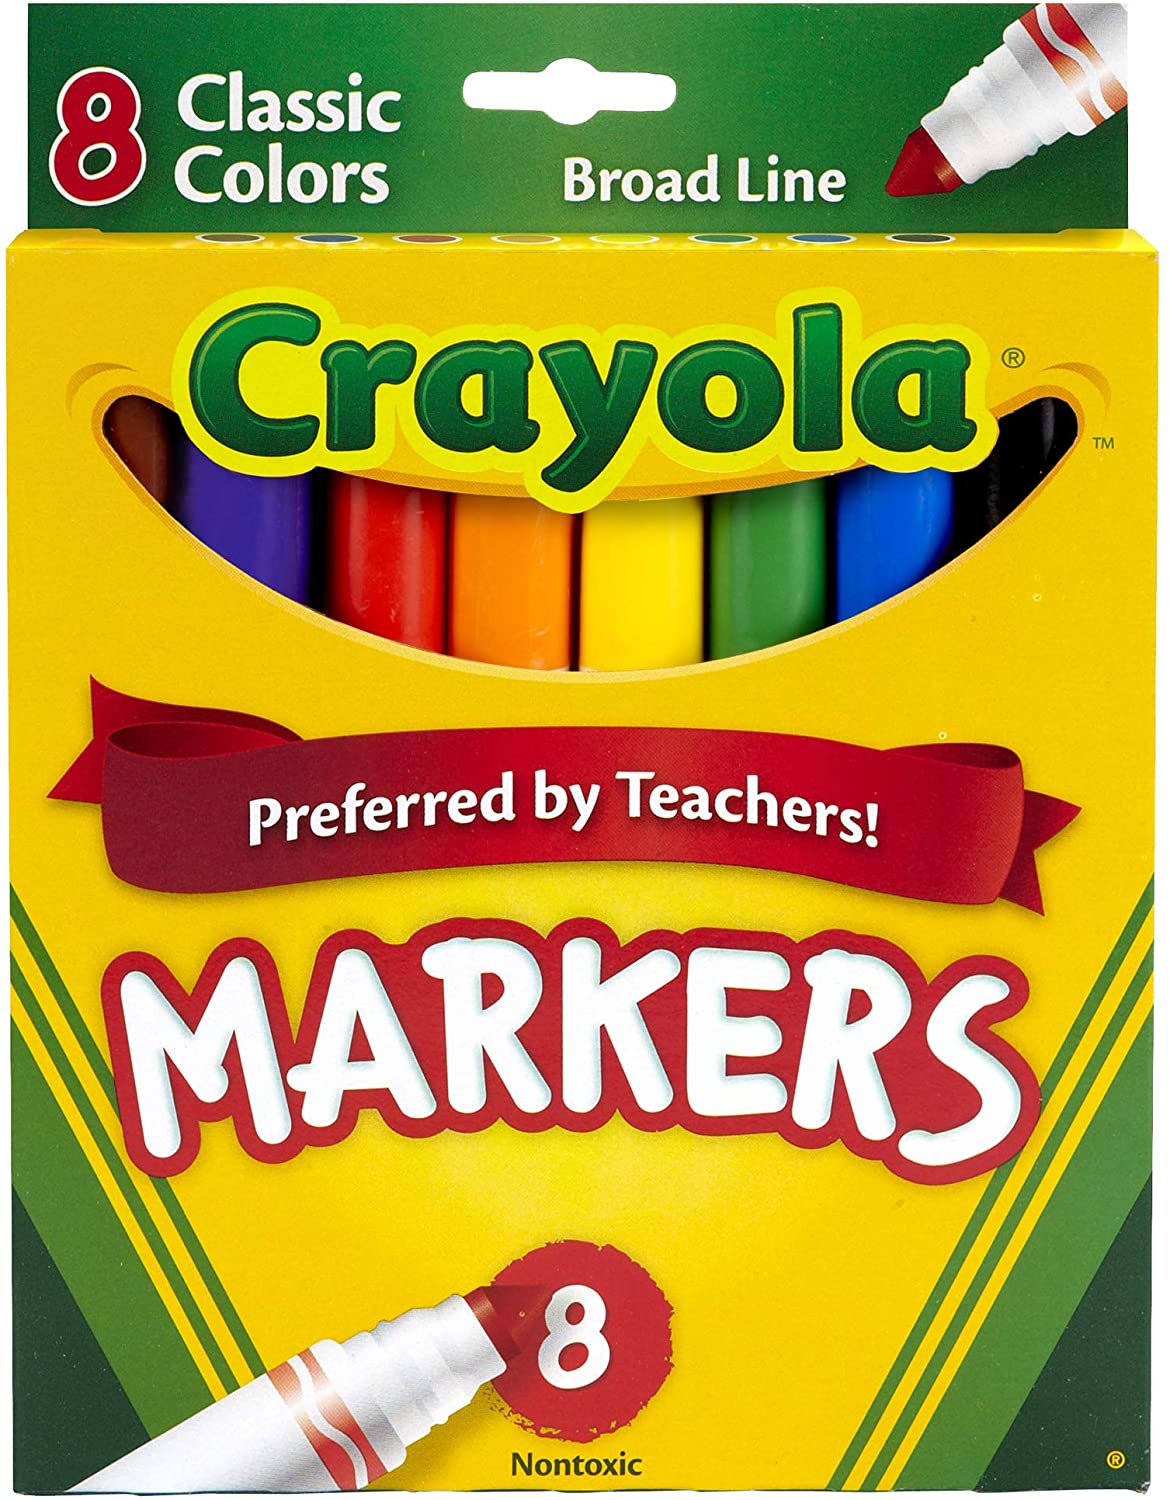 A pack of 8 Crayola broad lined markers with a variety of colors.